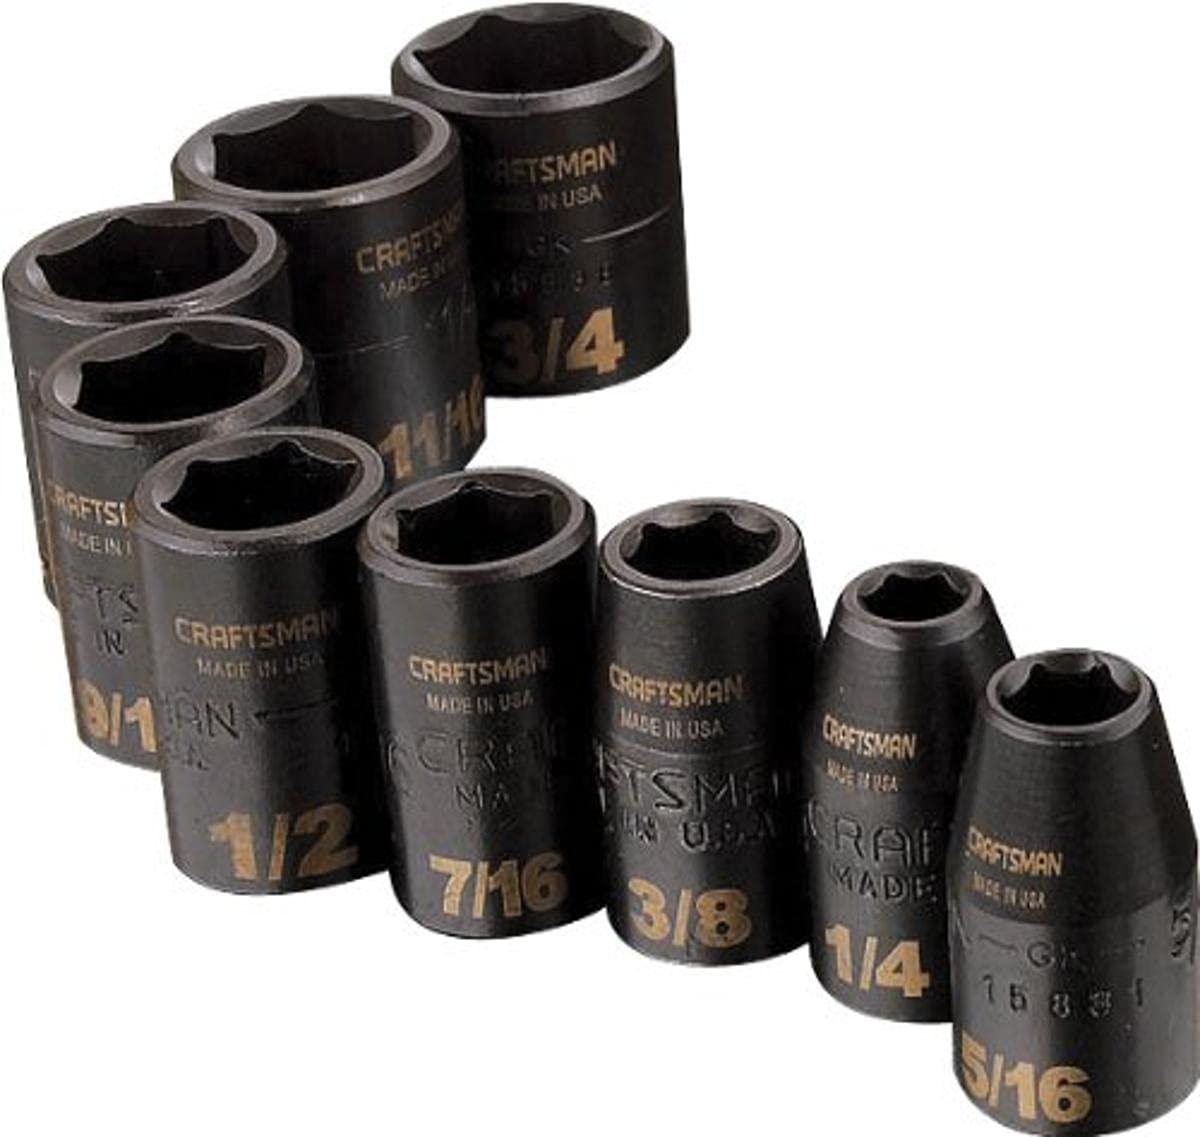 craftsman 9-15880 6 point 3/8-inch drive standard easy to read impact socket set, 9-piece